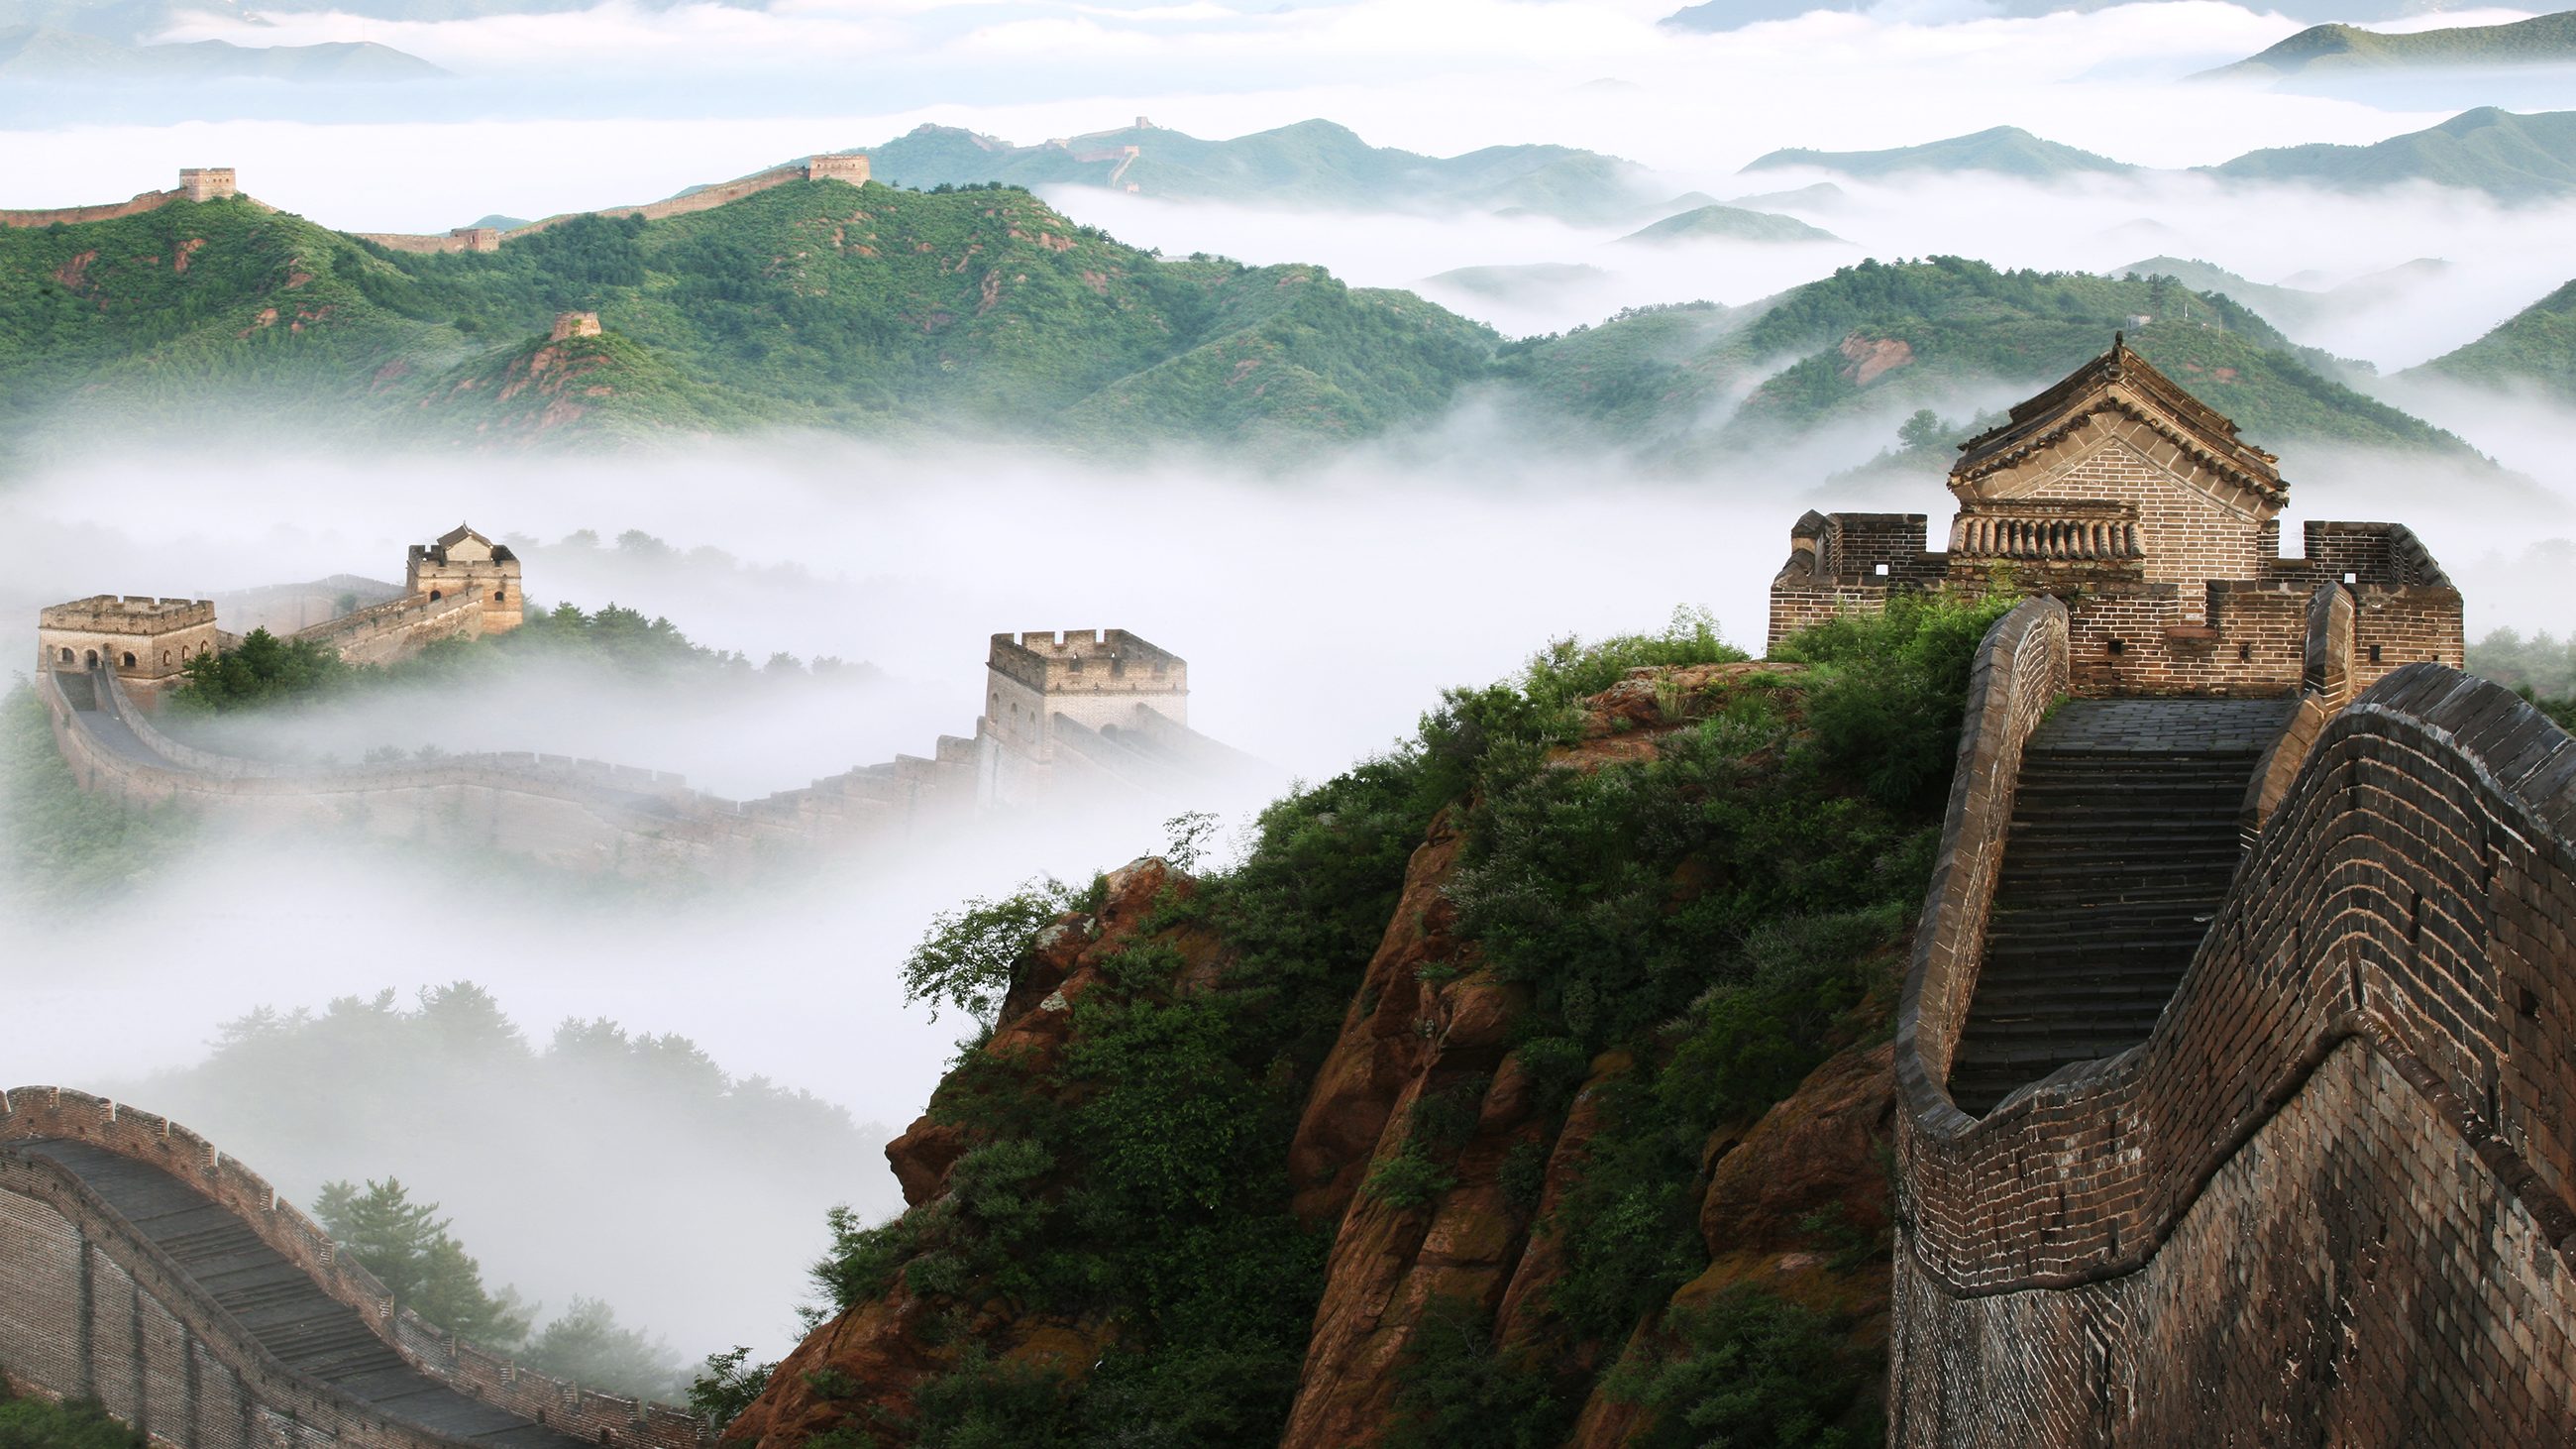 Jinshanling, a portion of the Great Wall near Beijing, China (View Stock/Getty Images)